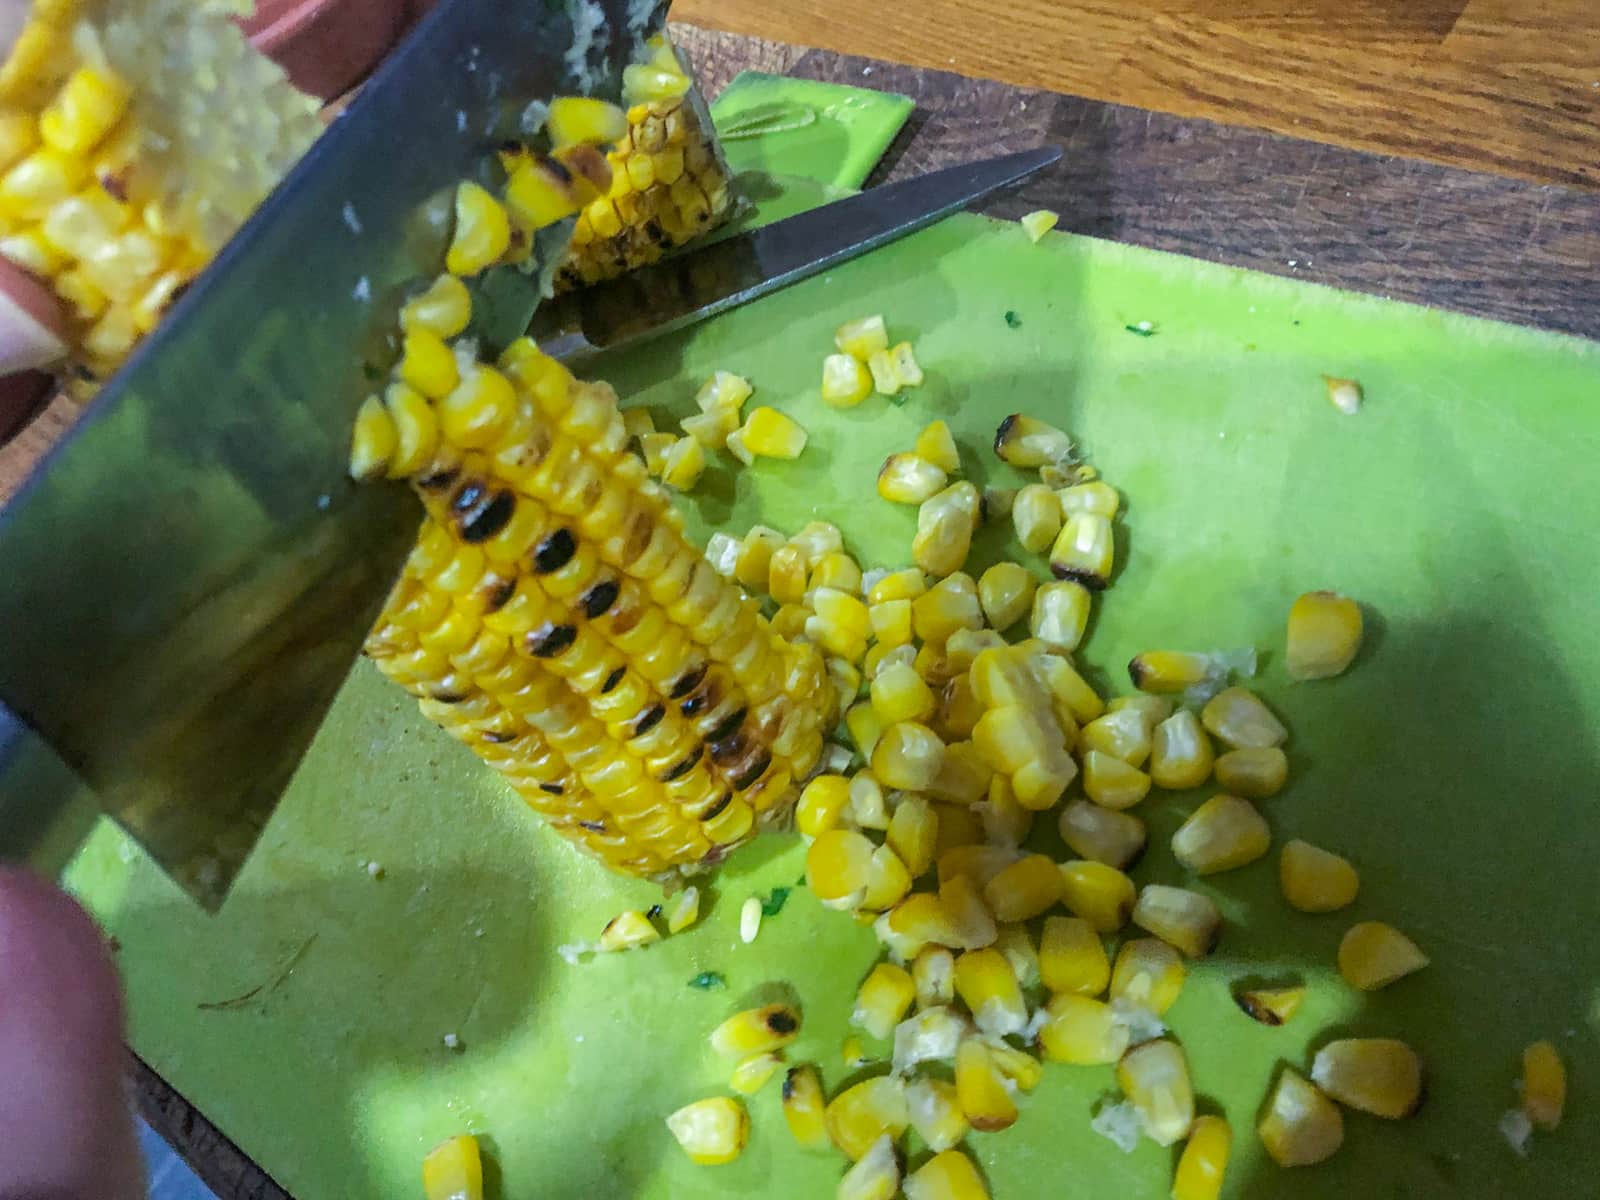 Slicing charred corn kernels from the cob.